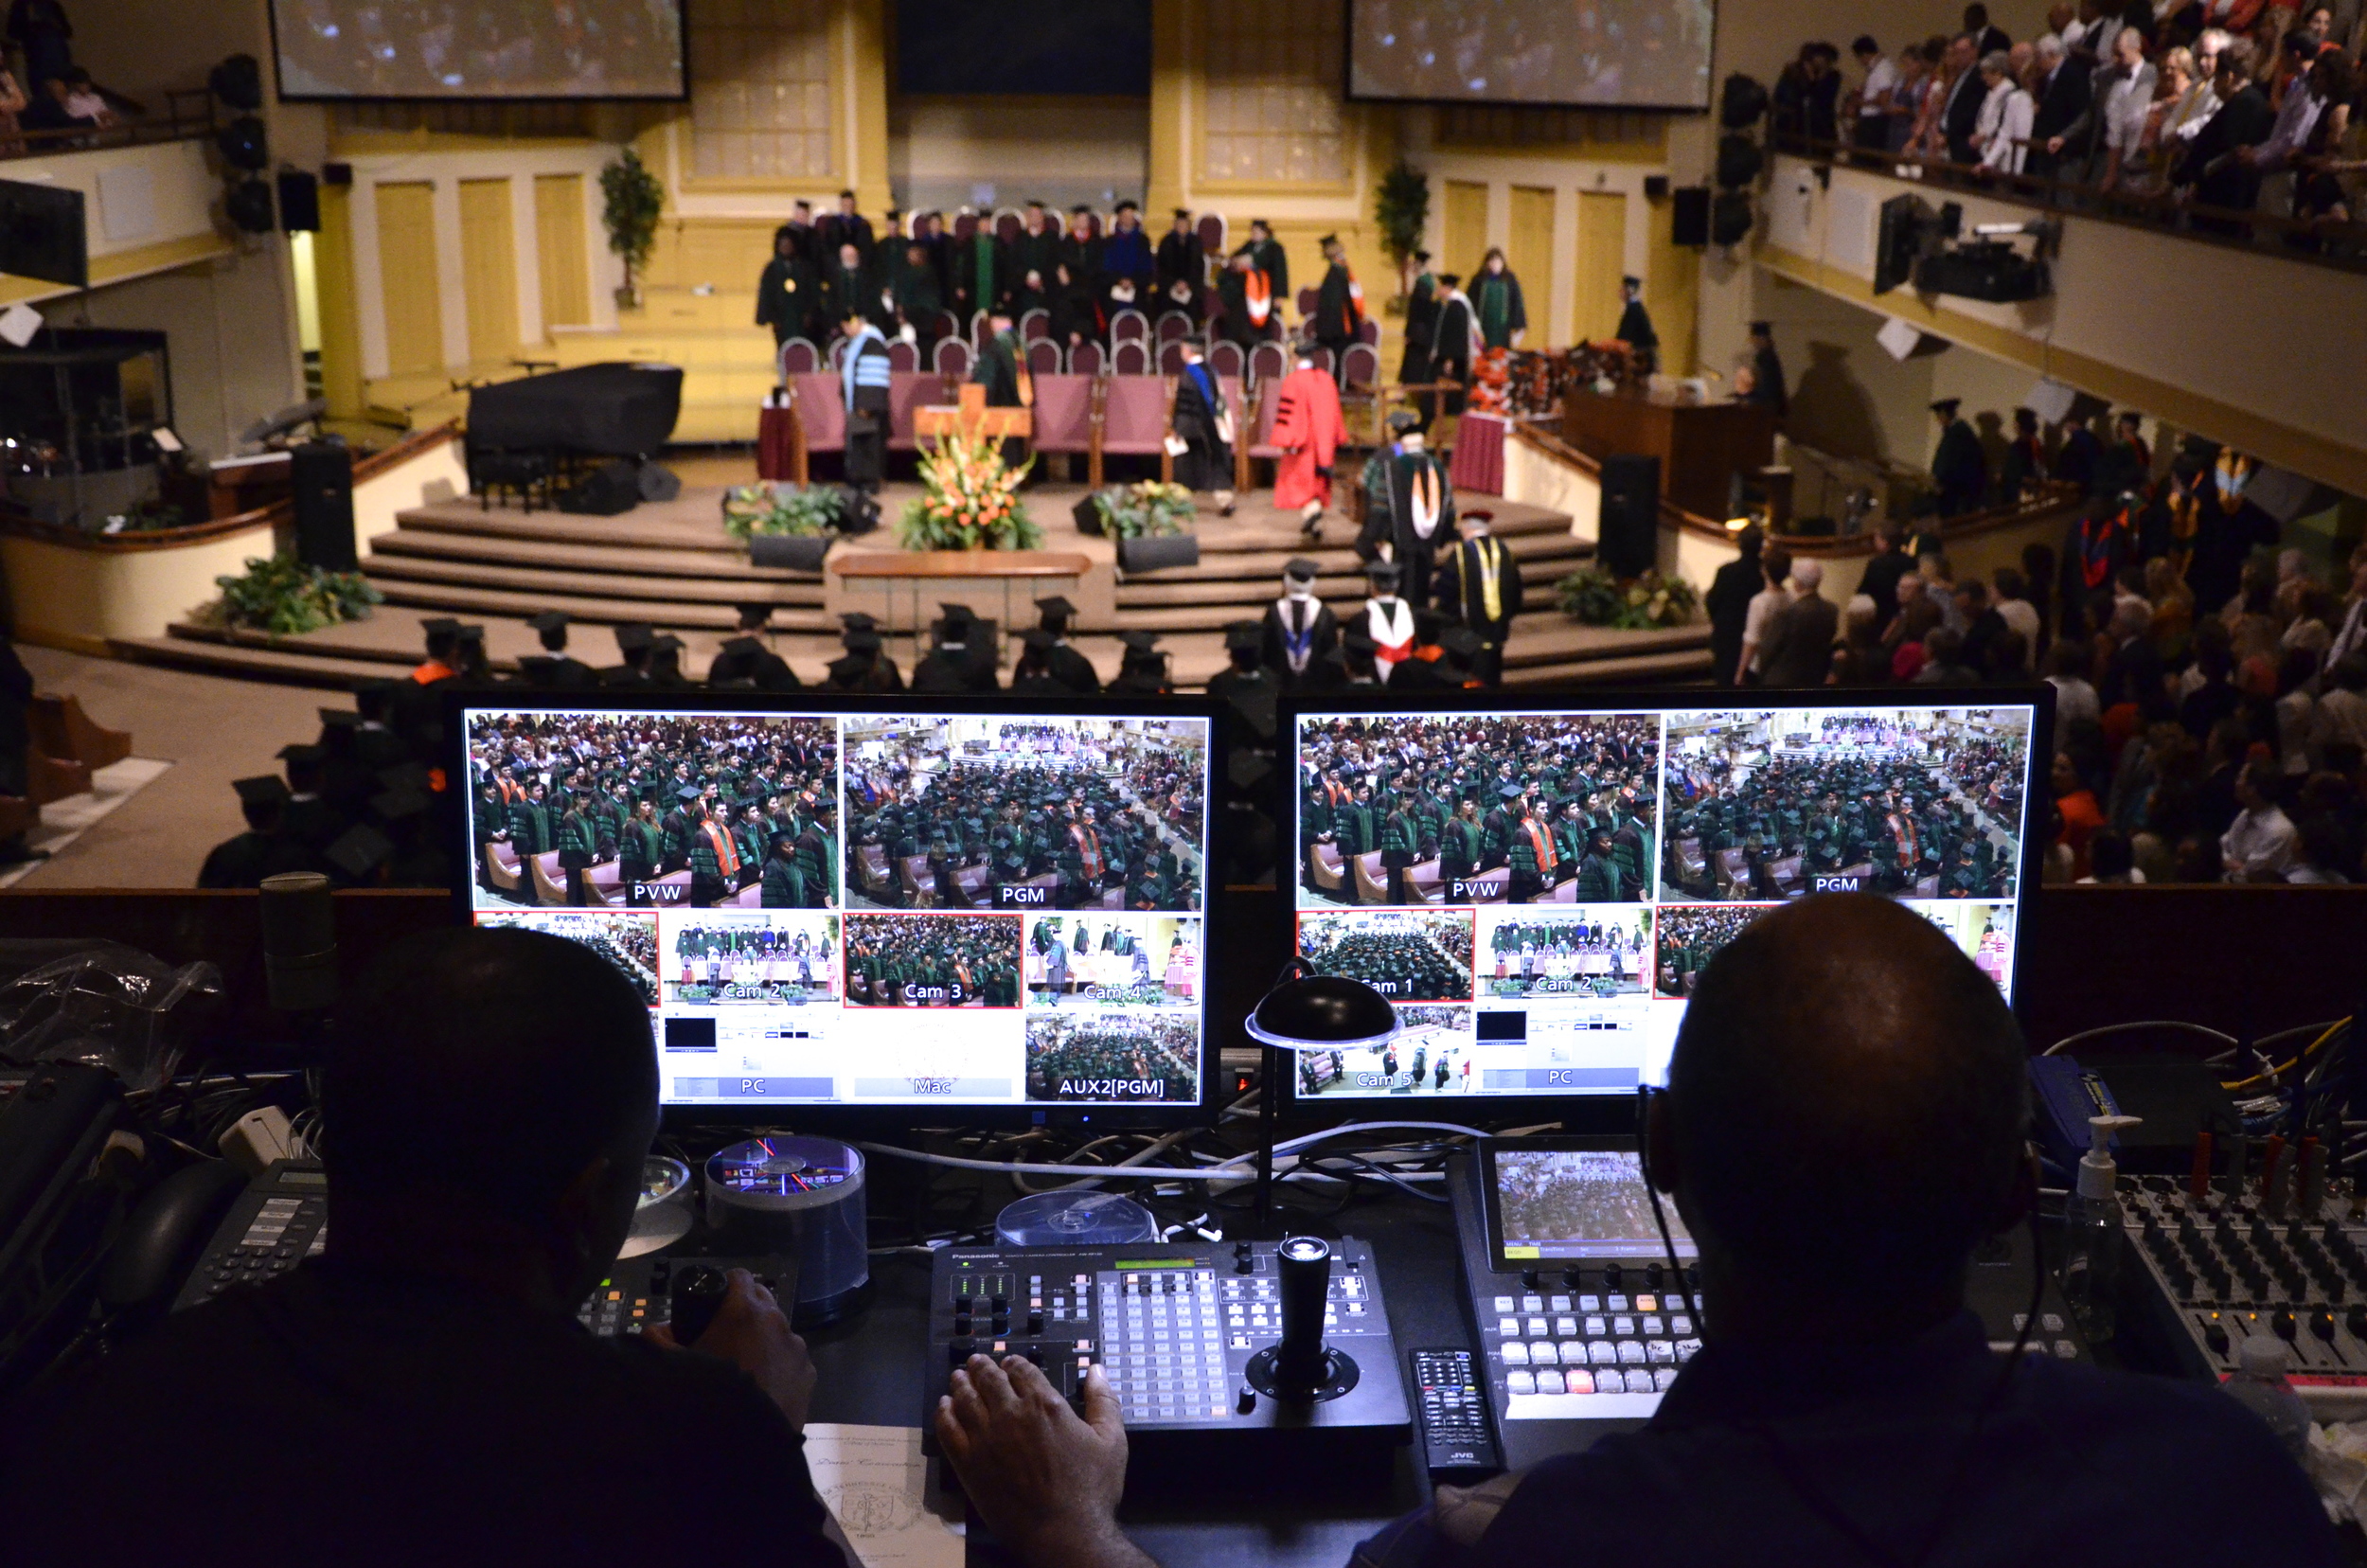 Behind the scene at the 2014 UTHSC College of Medicine Convocation